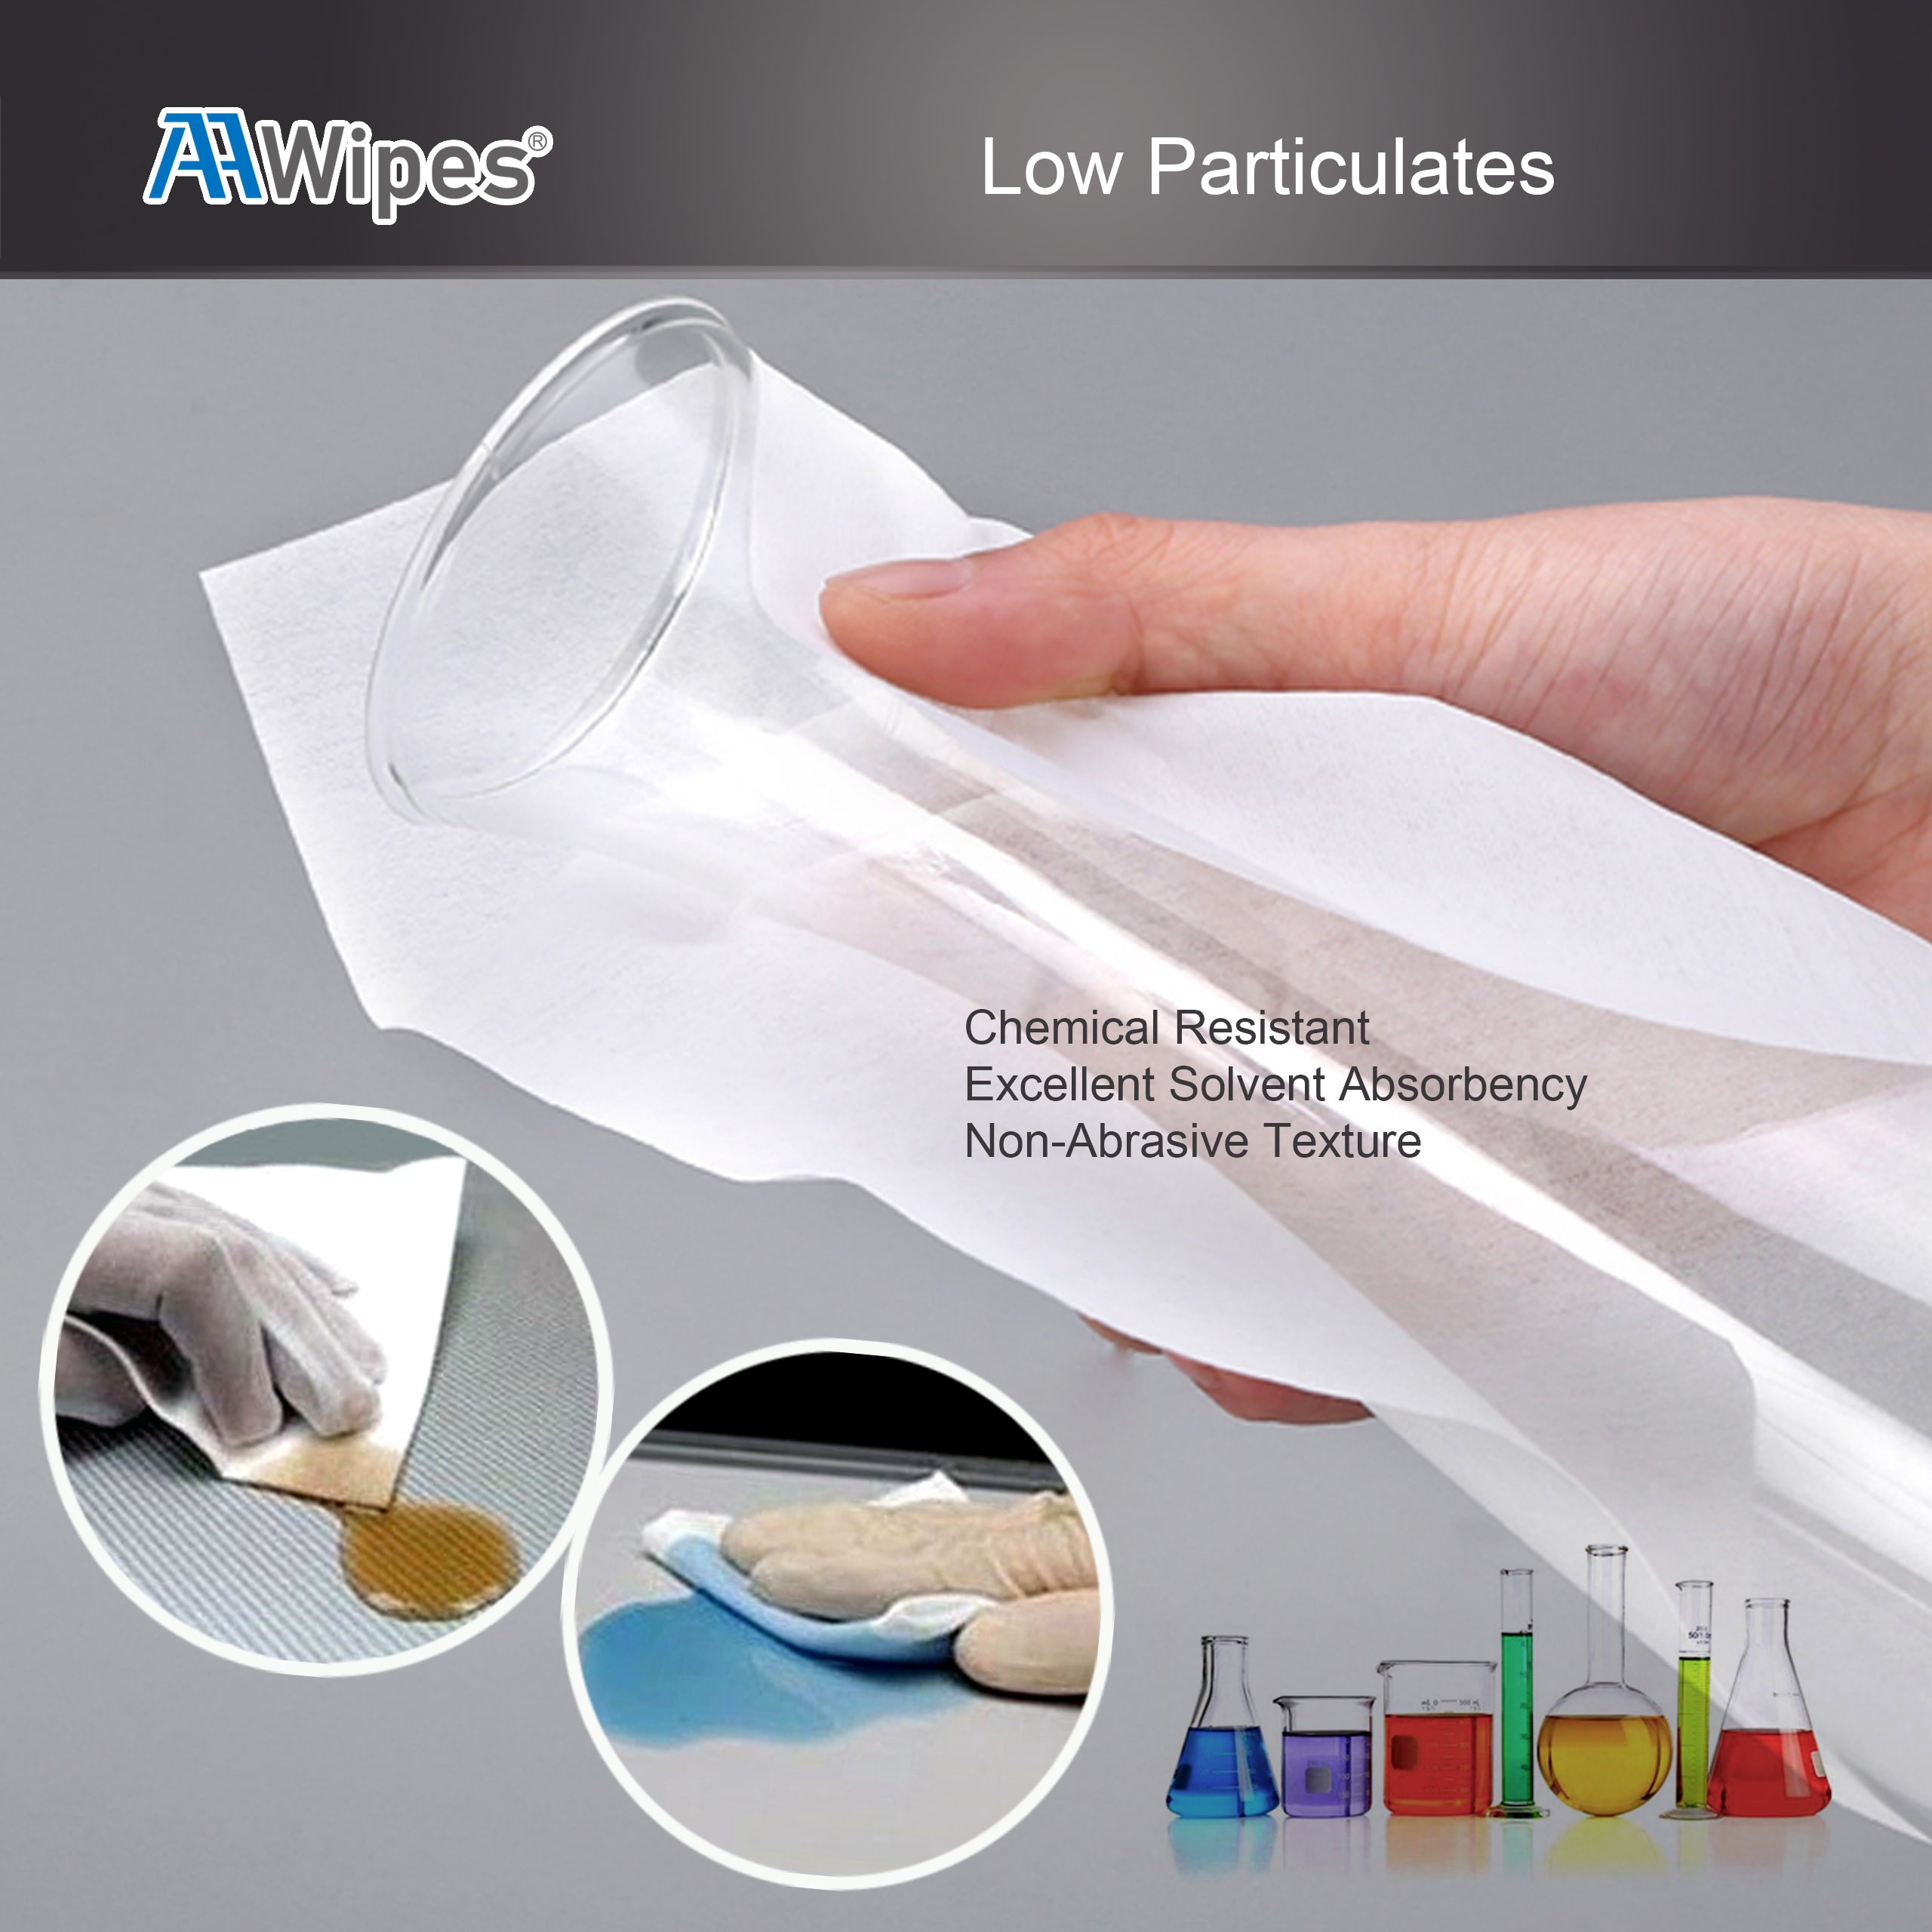 Cleanroom Nonwoven Wipes, Cellulose/Polyester Blend, 6" x 6" (Starting at 1 Box 9,000 Wipes per 30 Bags) (No. NW06806)